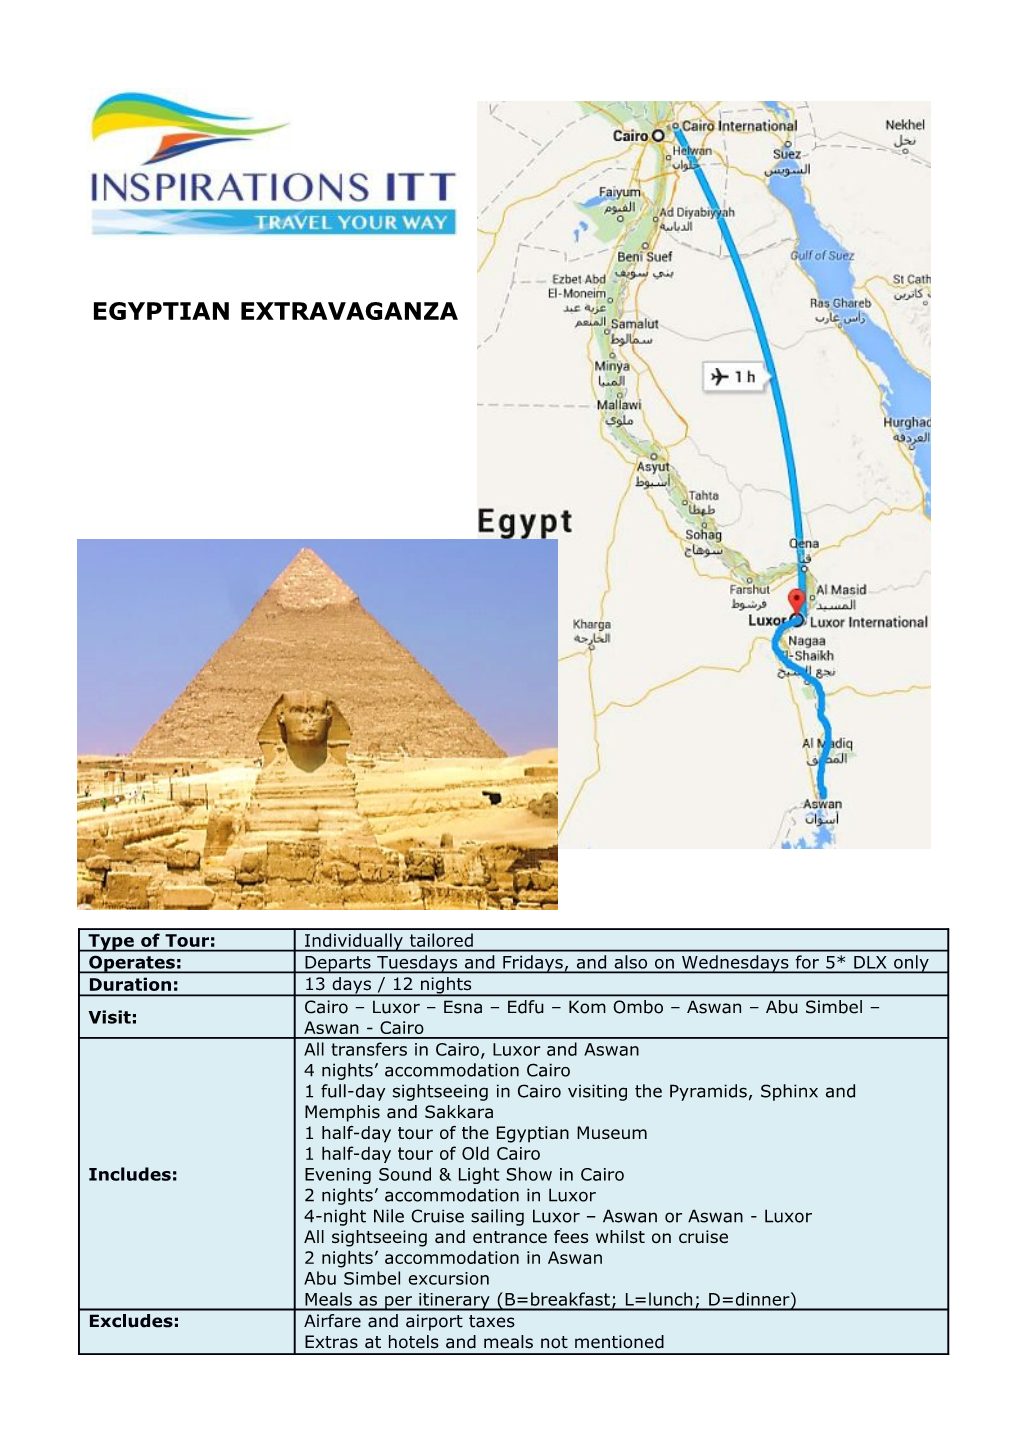 You Will Arrive in Cairo and Be Transferred to the Hotel